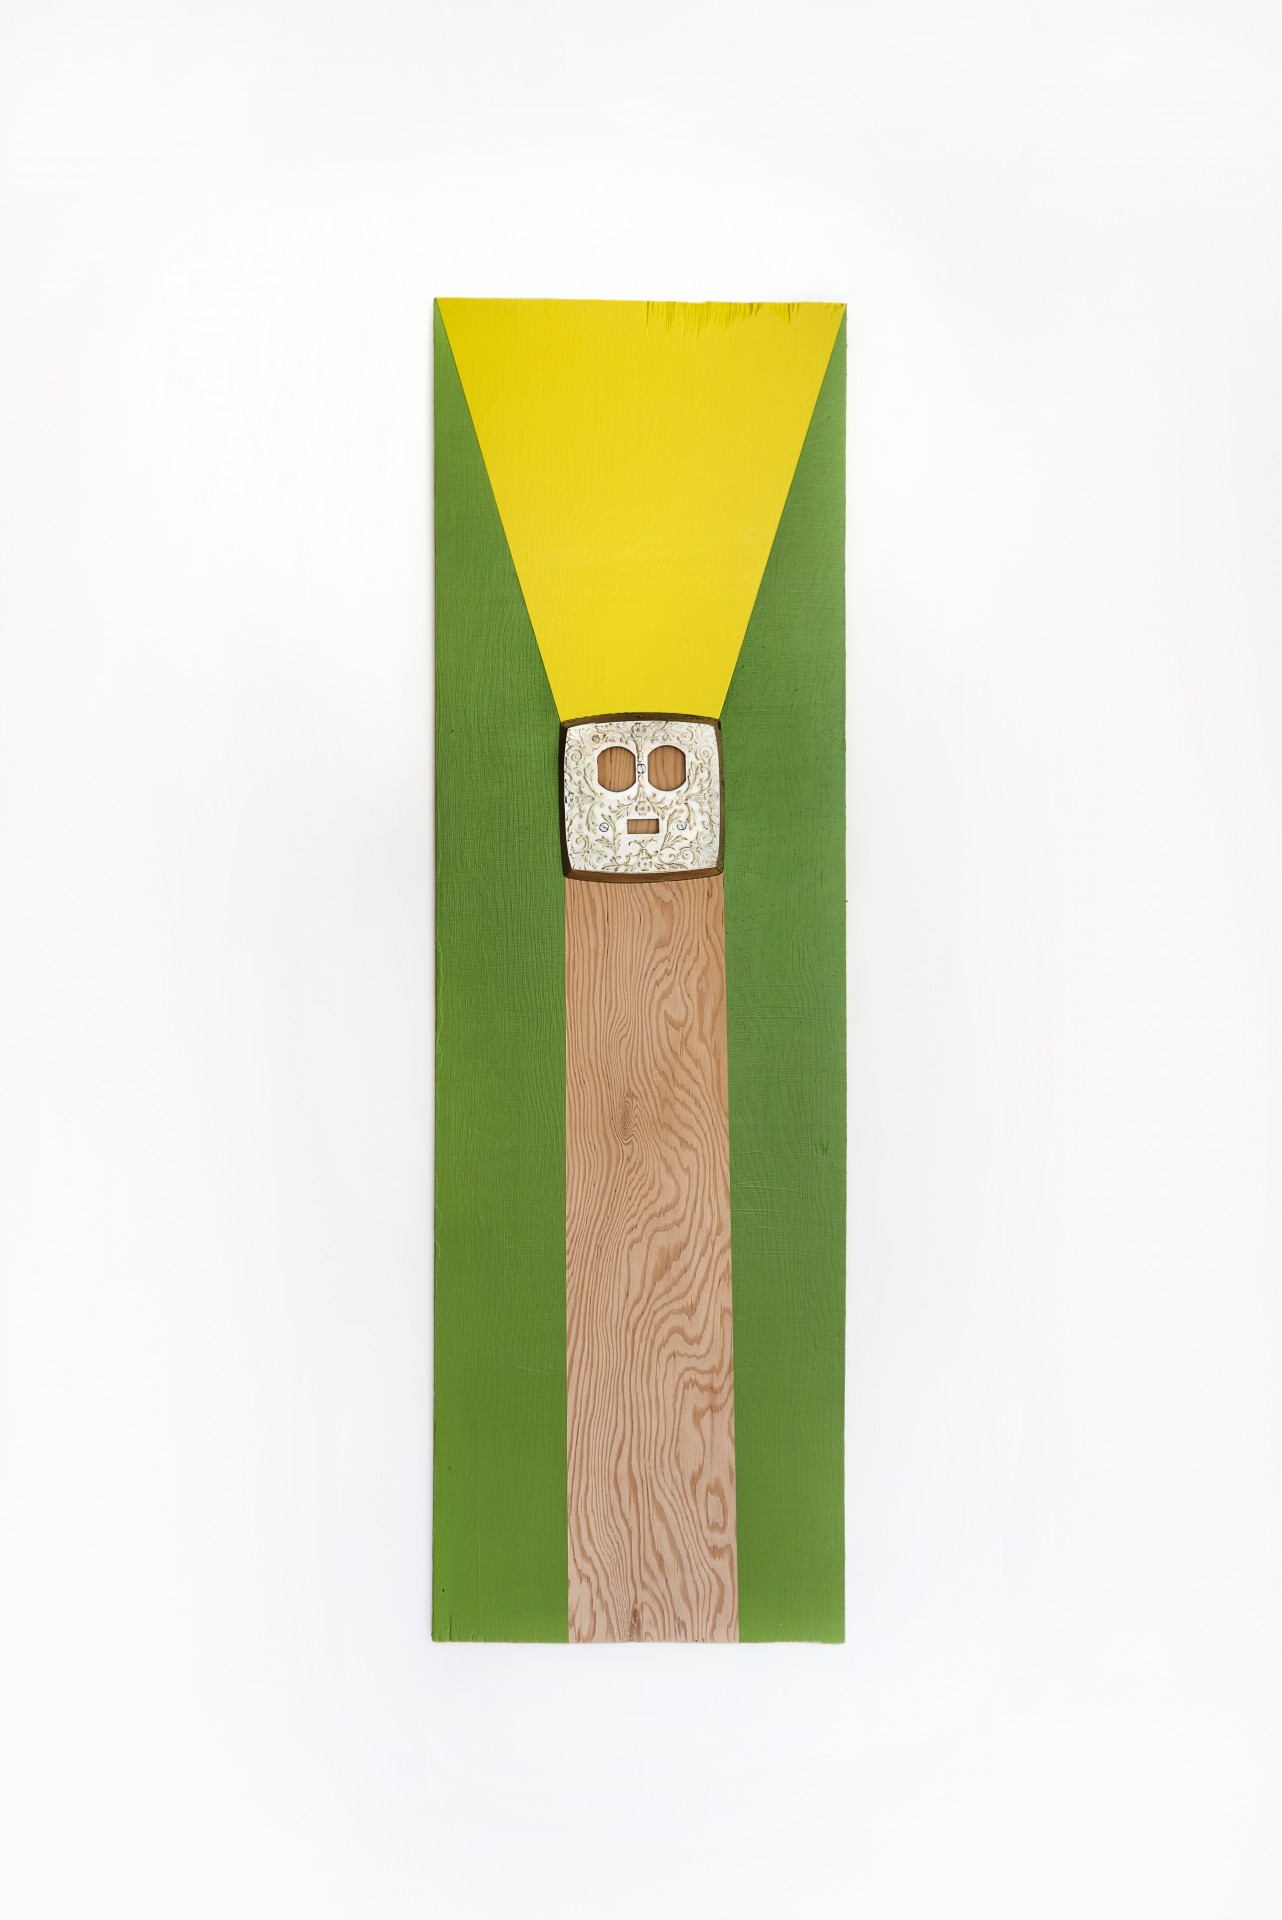 Michael Lazarus, *no title*, 2013. Paint, found object on wood 